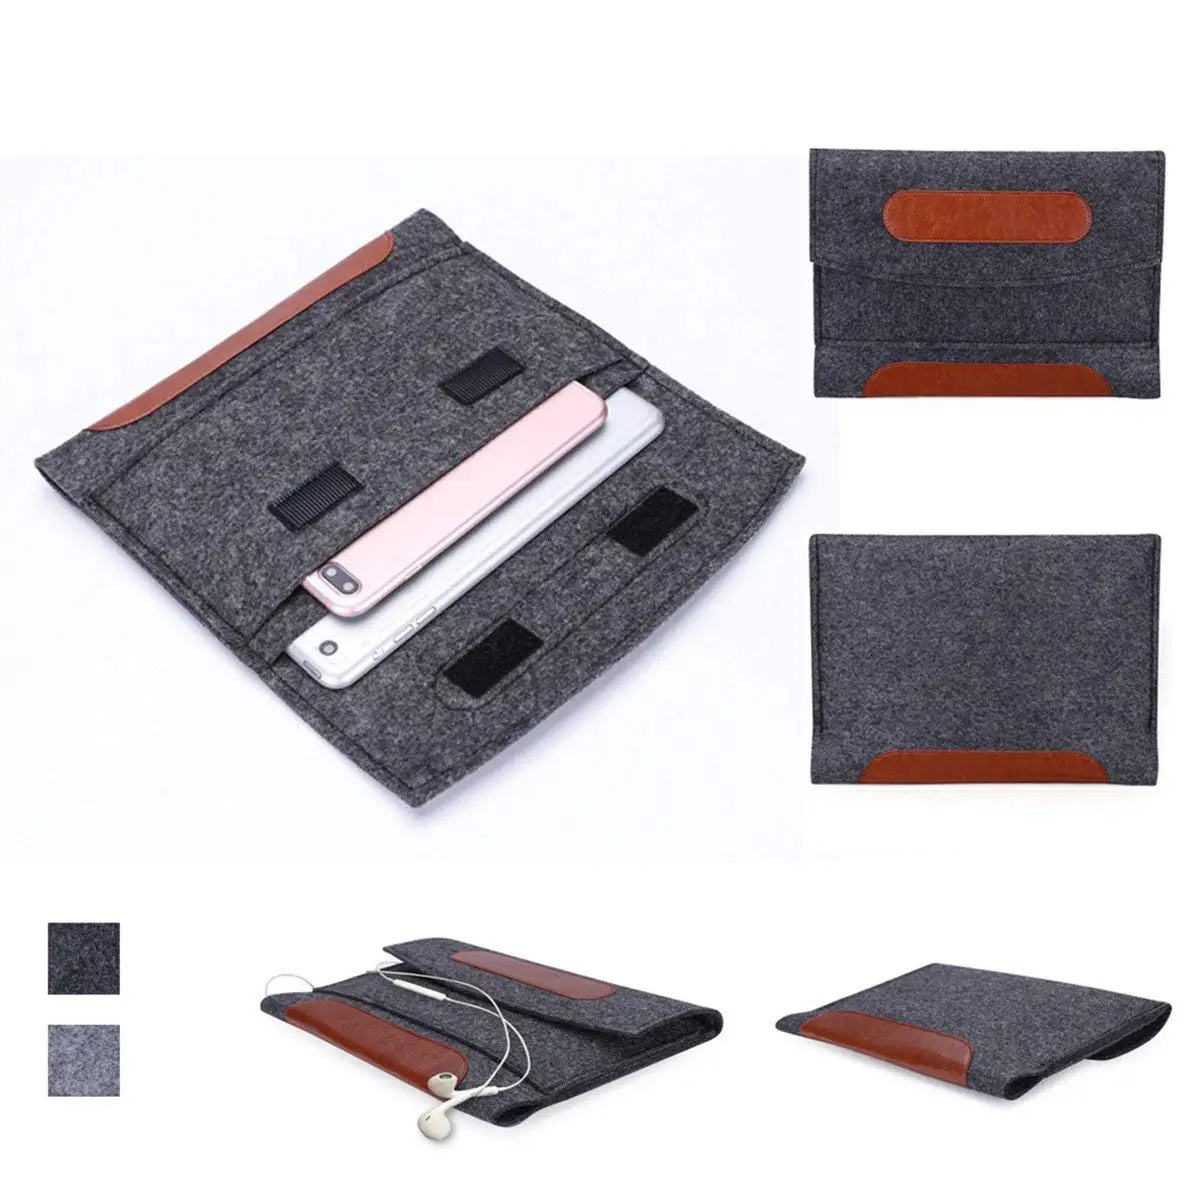 Cheap Laptop Rubber Cover, find Laptop Rubber Cover deals on line at ...